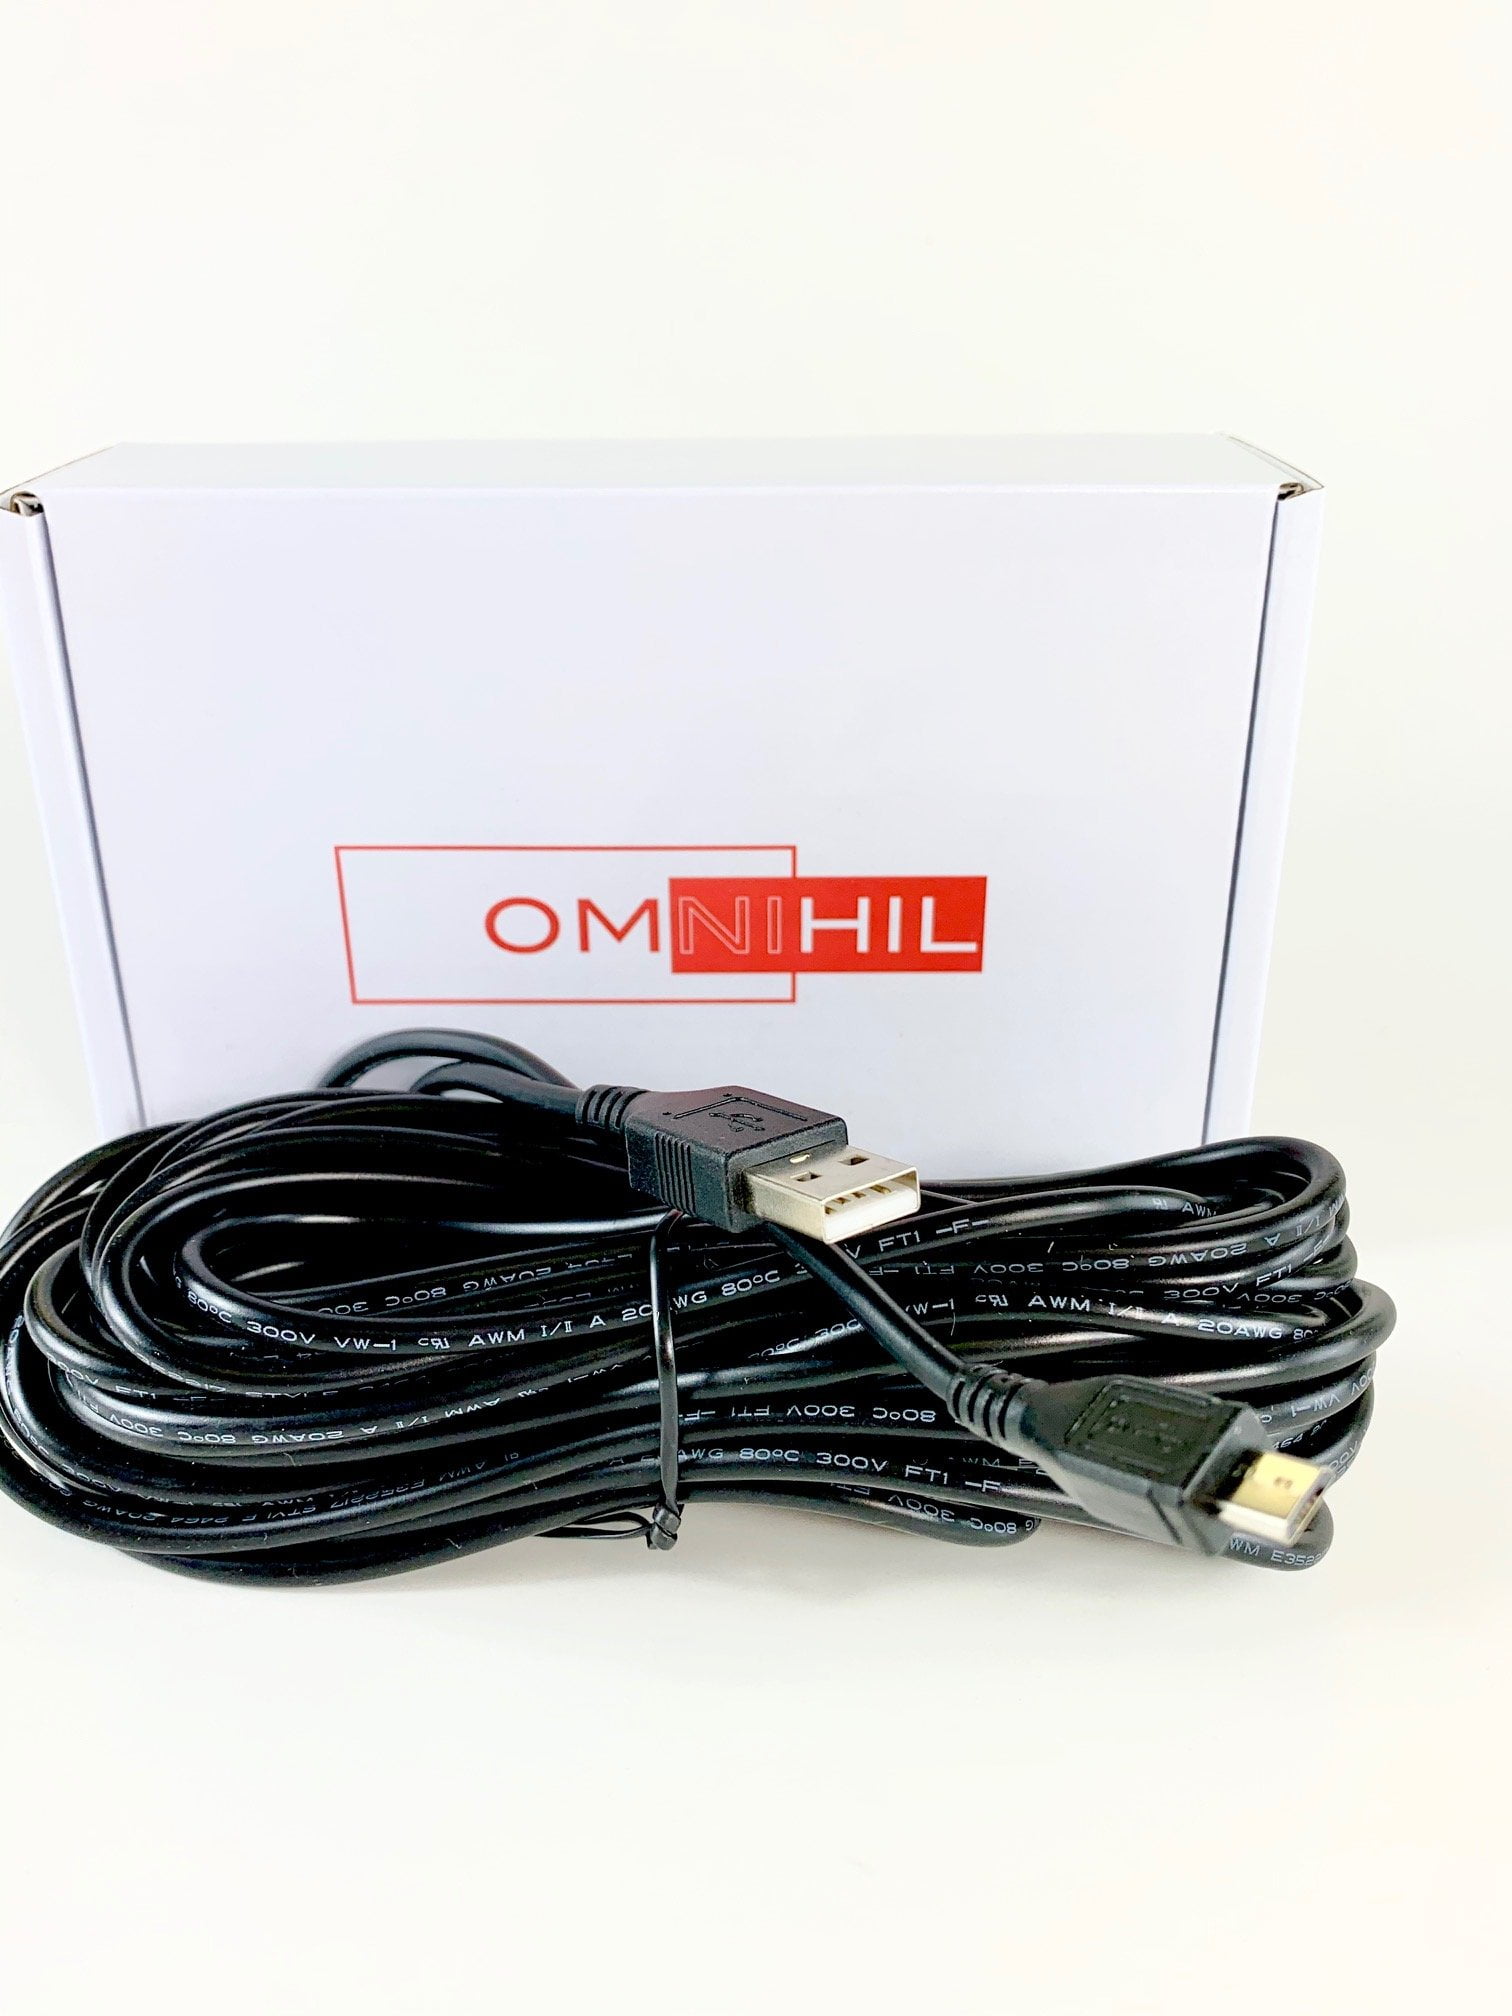 OMNIHIL 15 Feet Long High Speed USB 2.0 Cable Compatible with Lumens DC125 